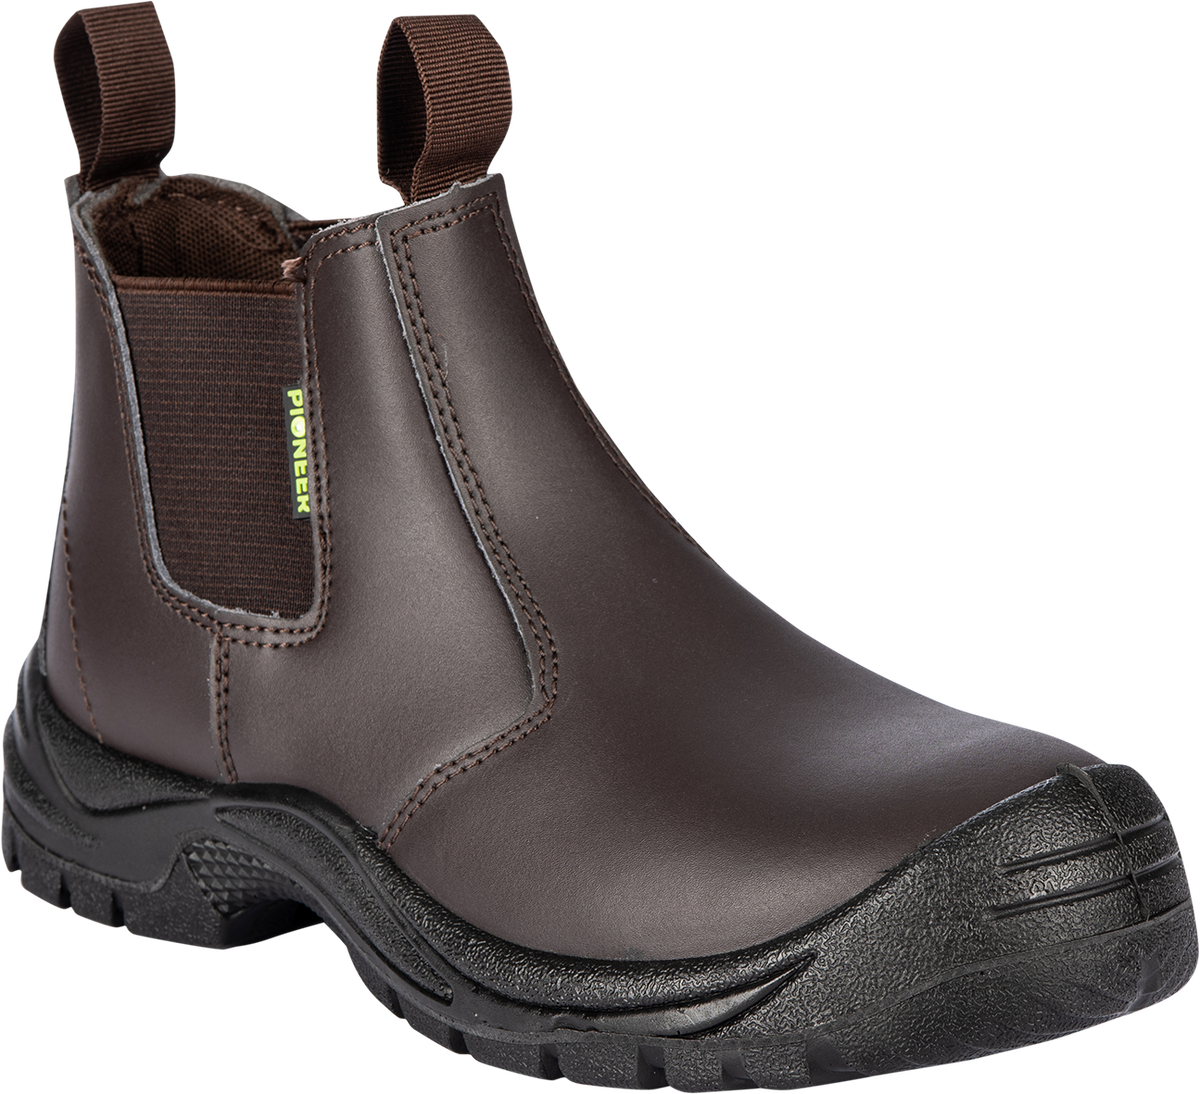 PIONEER COMMANDER Safety Boot - Brown